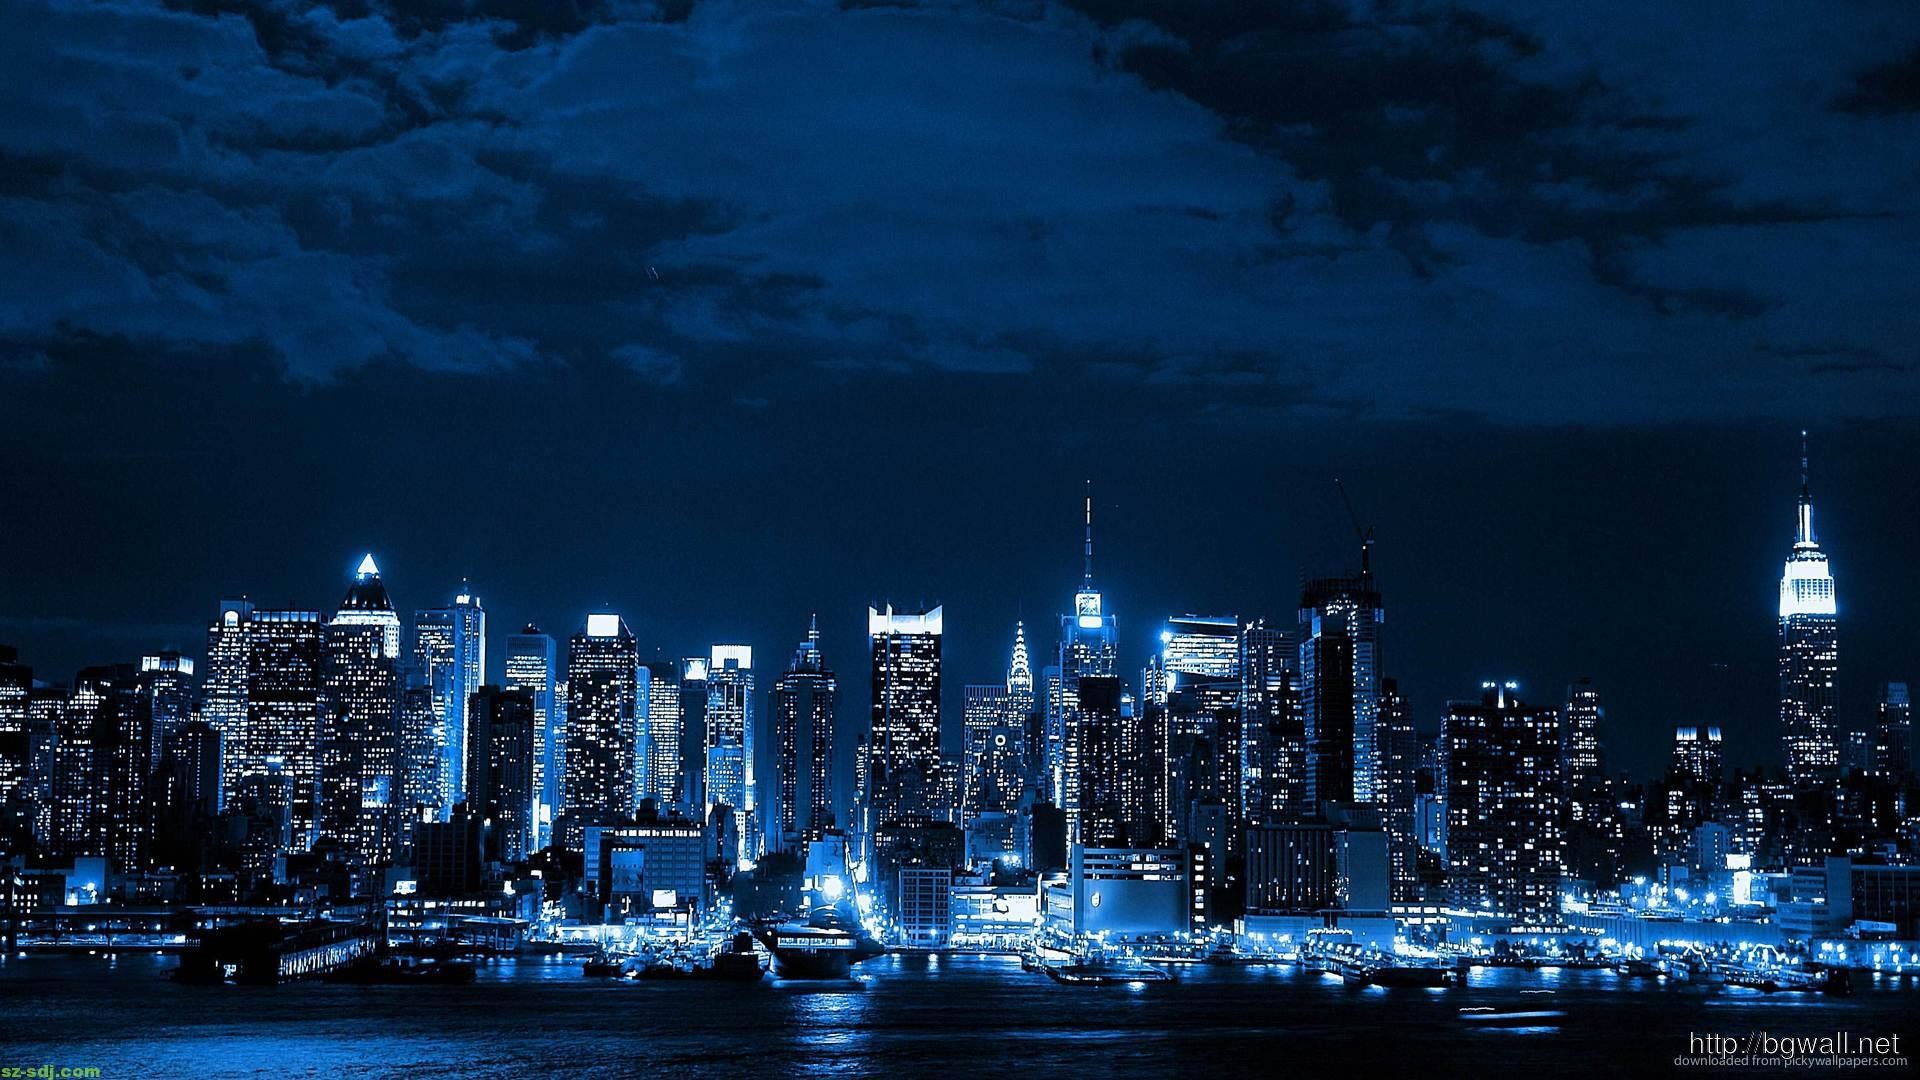 1920x1080 Night City Wallpapers Mobile | Landscape Wallpapers | Pinterest | City  wallpaper, Night city and Wallpaper